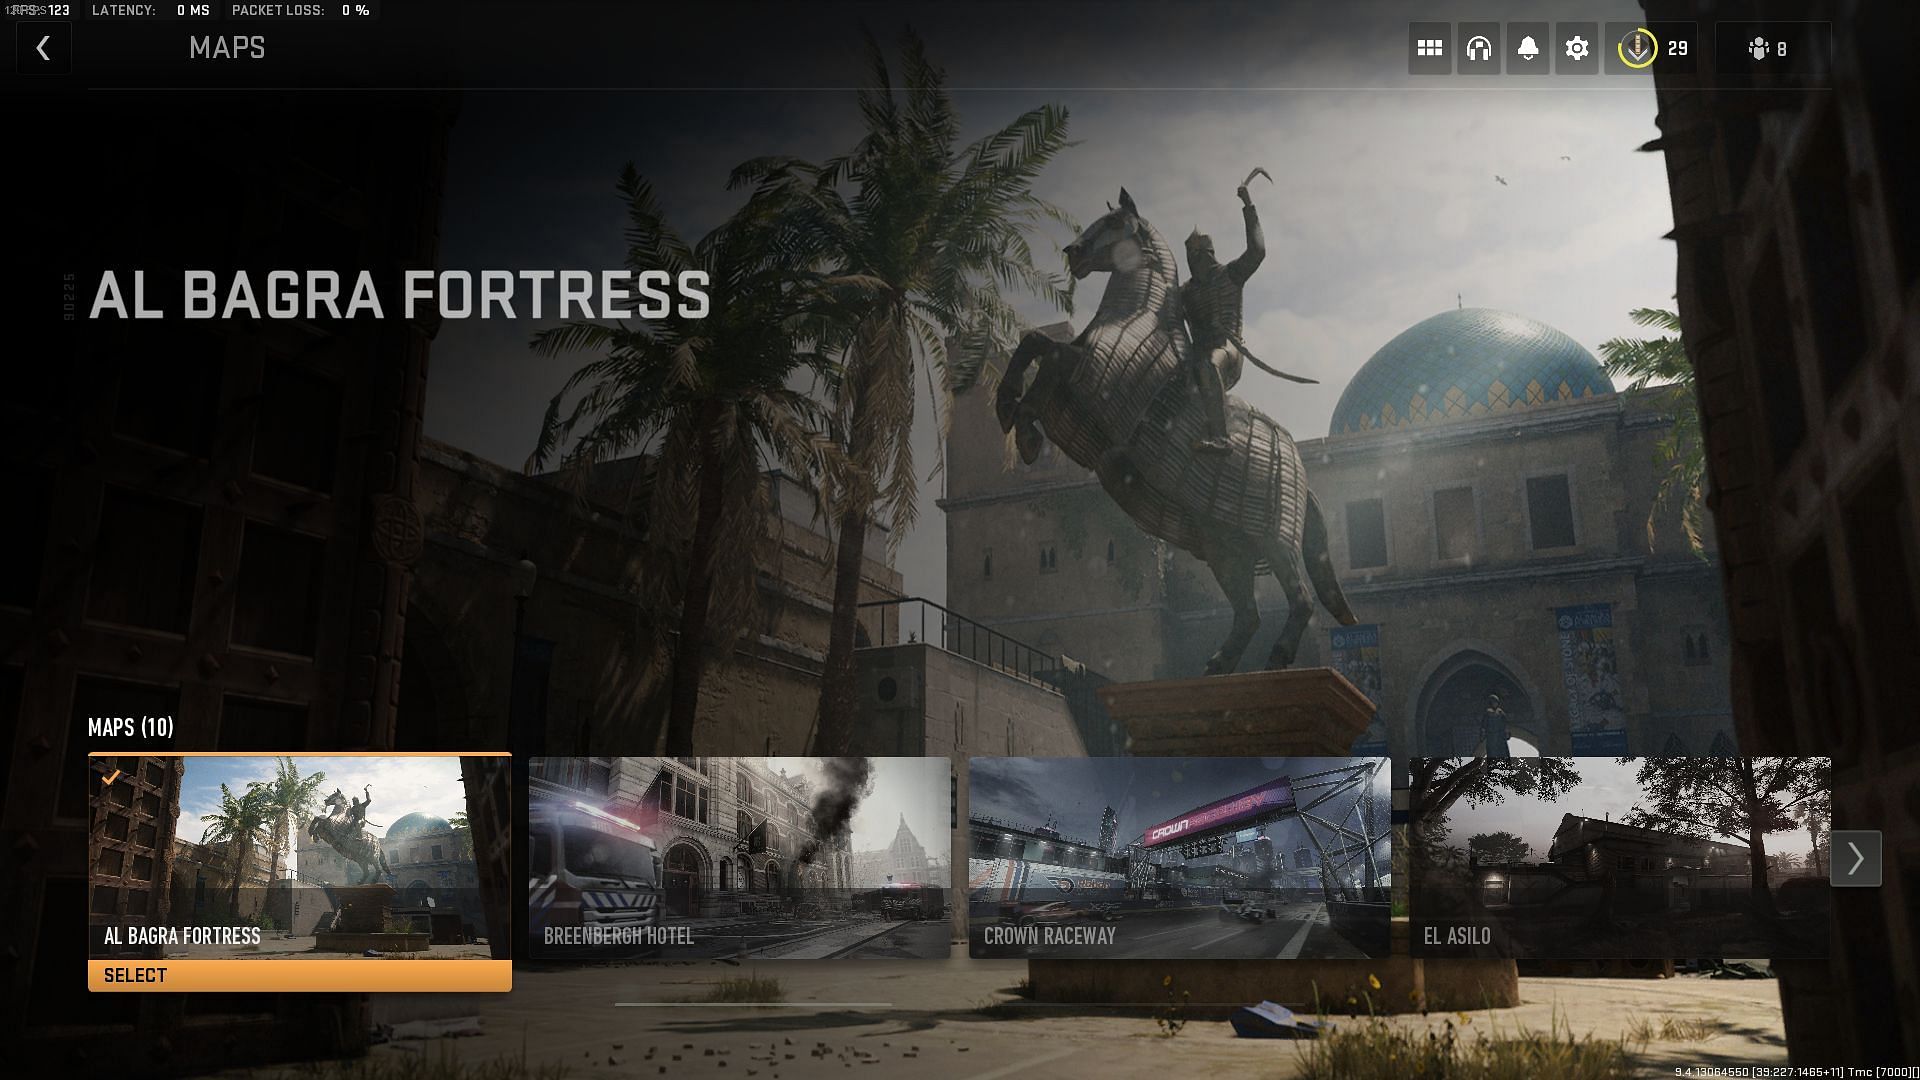 Al Bagra Fortress map selection in the Private Match settings (image by Sportskeeda)